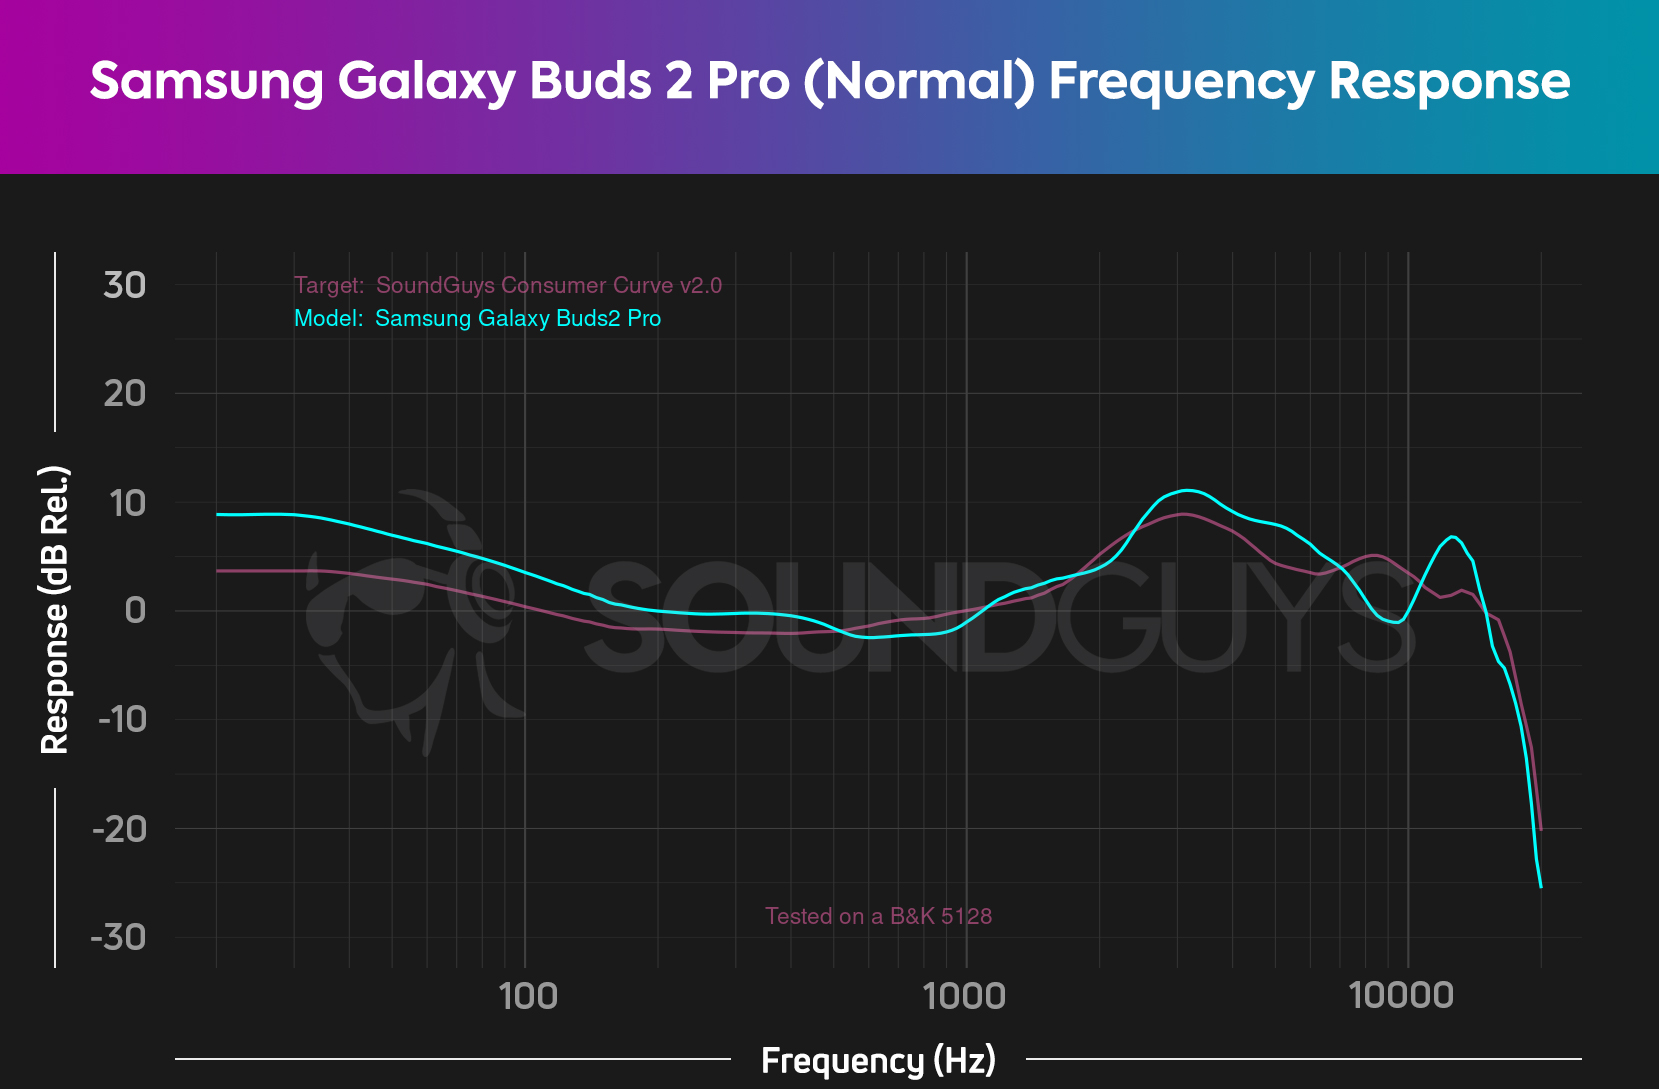 The normal EQ frequency response of the Samsung Galaxy Buds 2 Pro as compared to the target curve, which it follows closely.